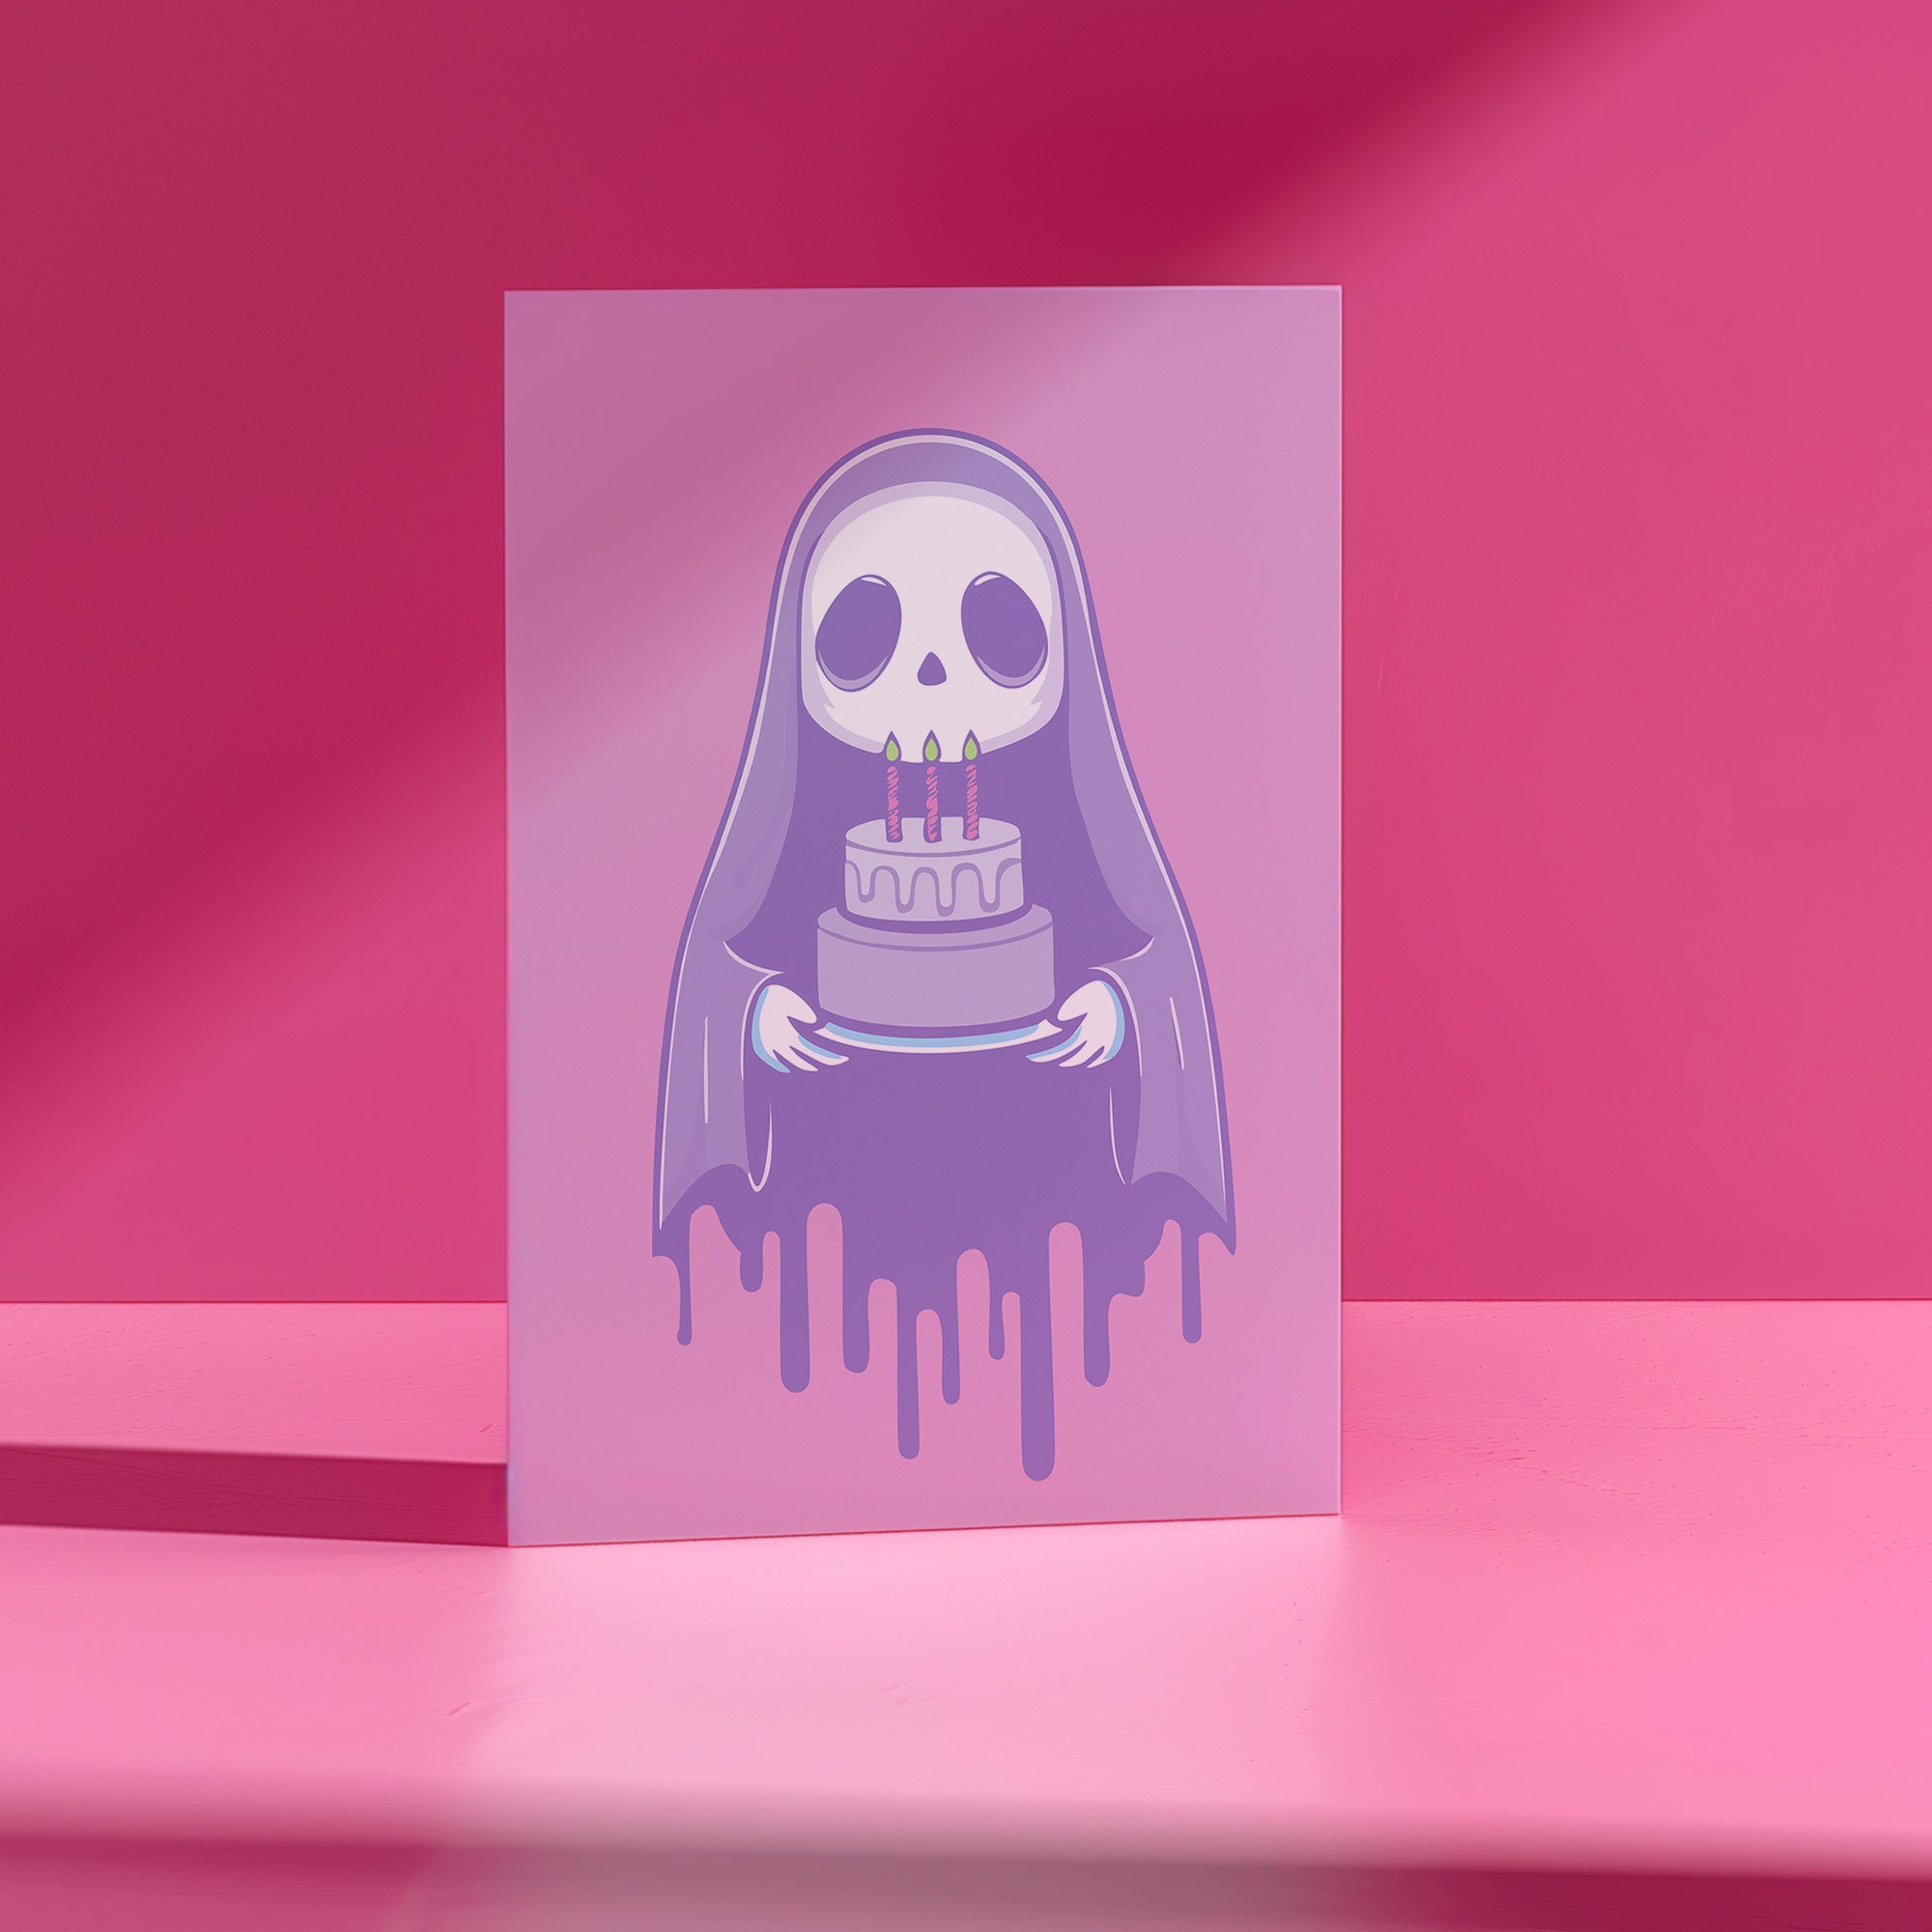 Birthday card featuring a cute cartoon grim reaper holding a birthday cake on pink background. The reaper wears a purple cloak and has a white skull face. It's carrying a small purple cake with three lit candles. The reaper's cloak drips like melting icing at the bottom. Ideal for Halloween birthdays or gothic-themed celebrations. Inside greeting: 